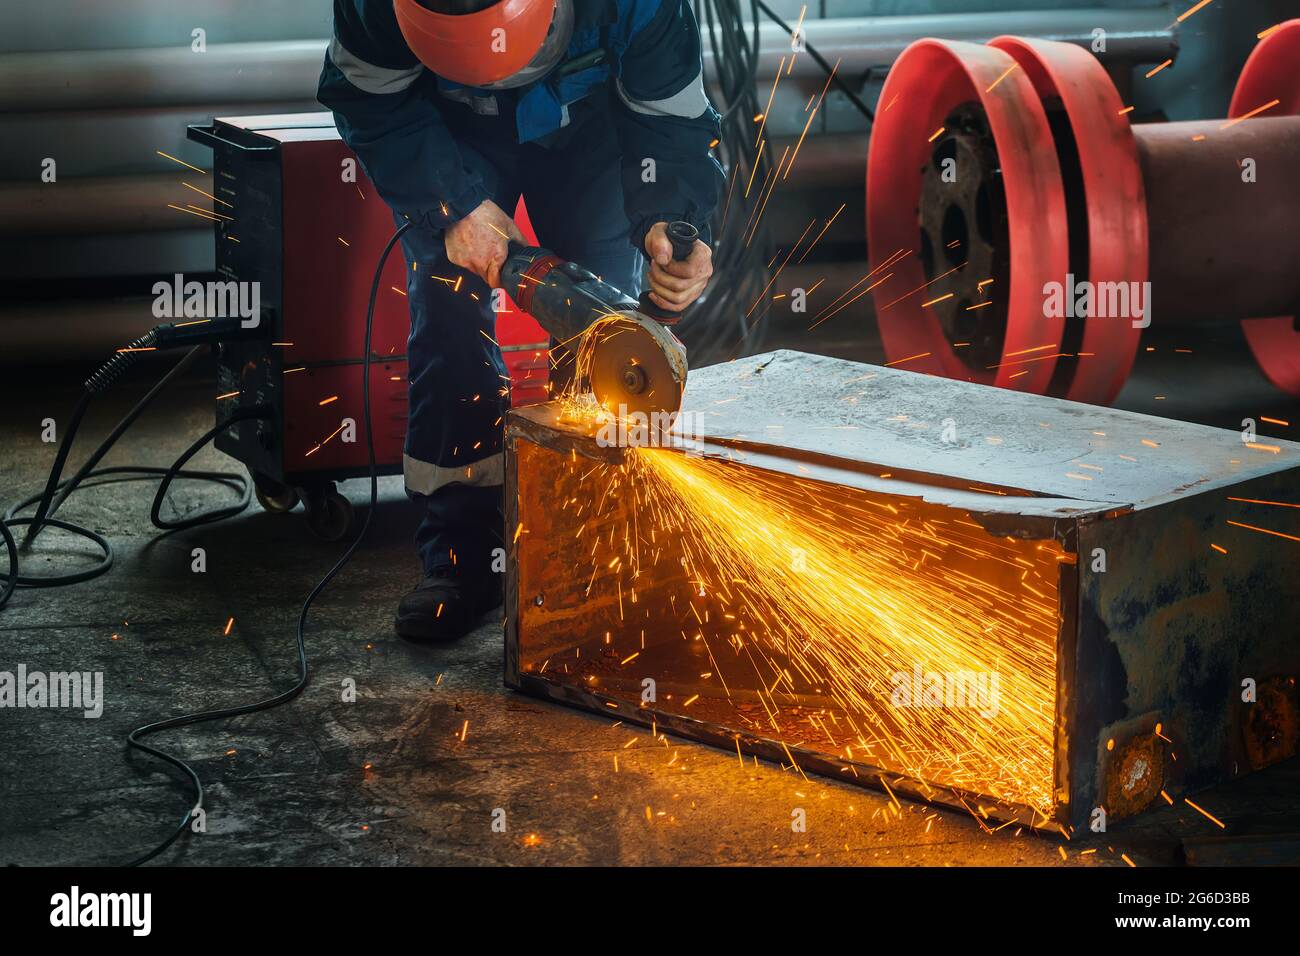 A worker cuts metal with a hand grinder in the production shop and bright sparks fly. A genuine working environment. A man at work. Stock Photo